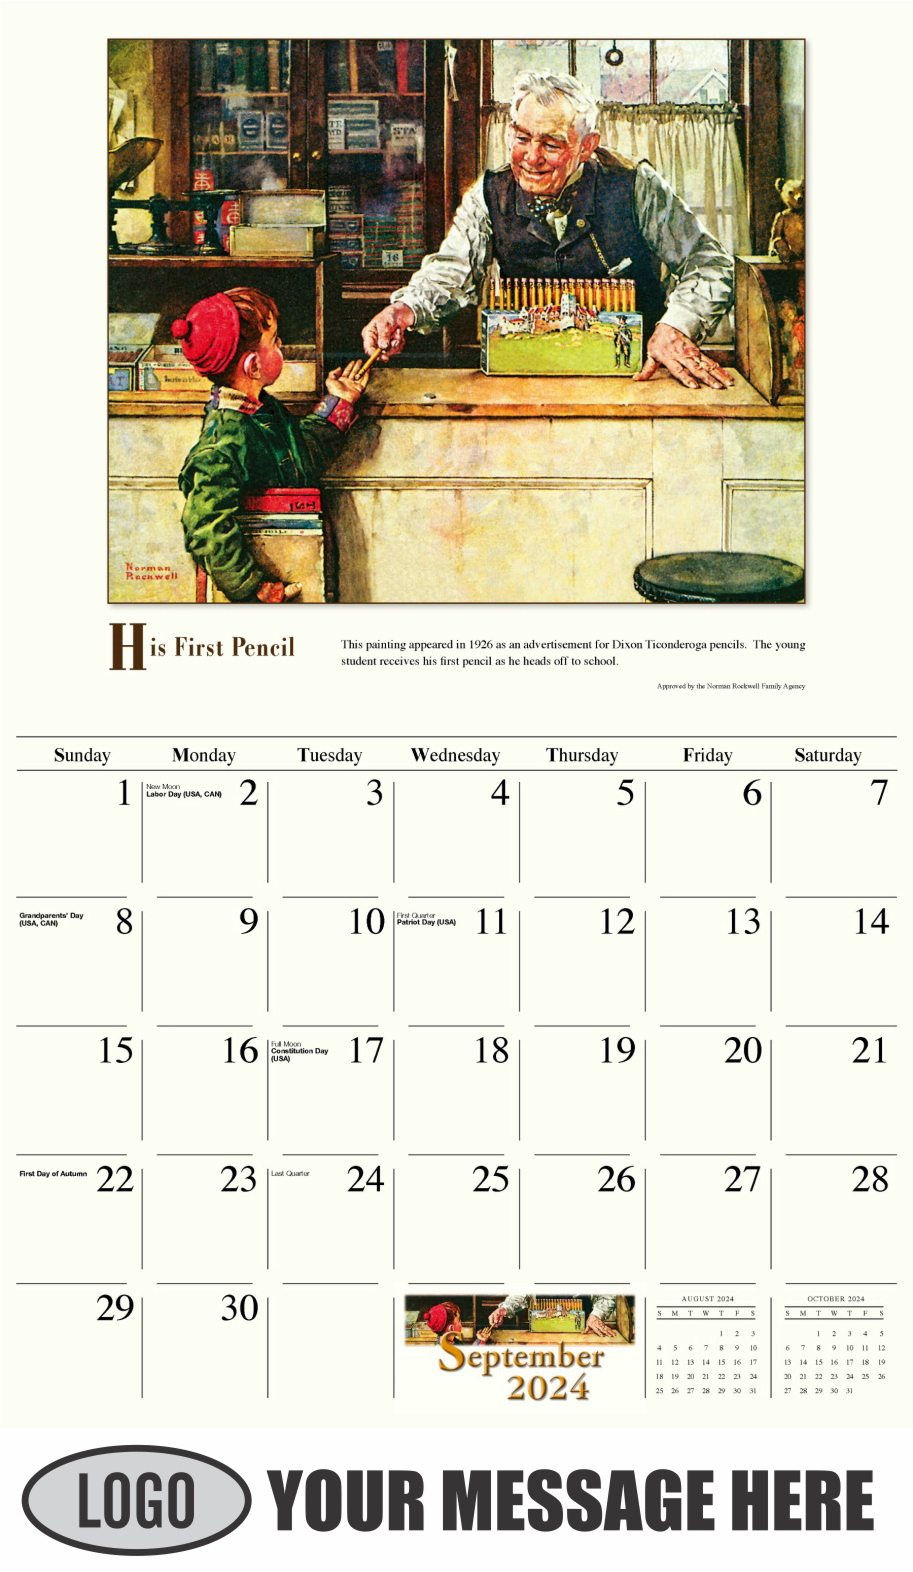 Memorable Images by Norman Rockwell 2024 Business Promotional Wall Calendar - September